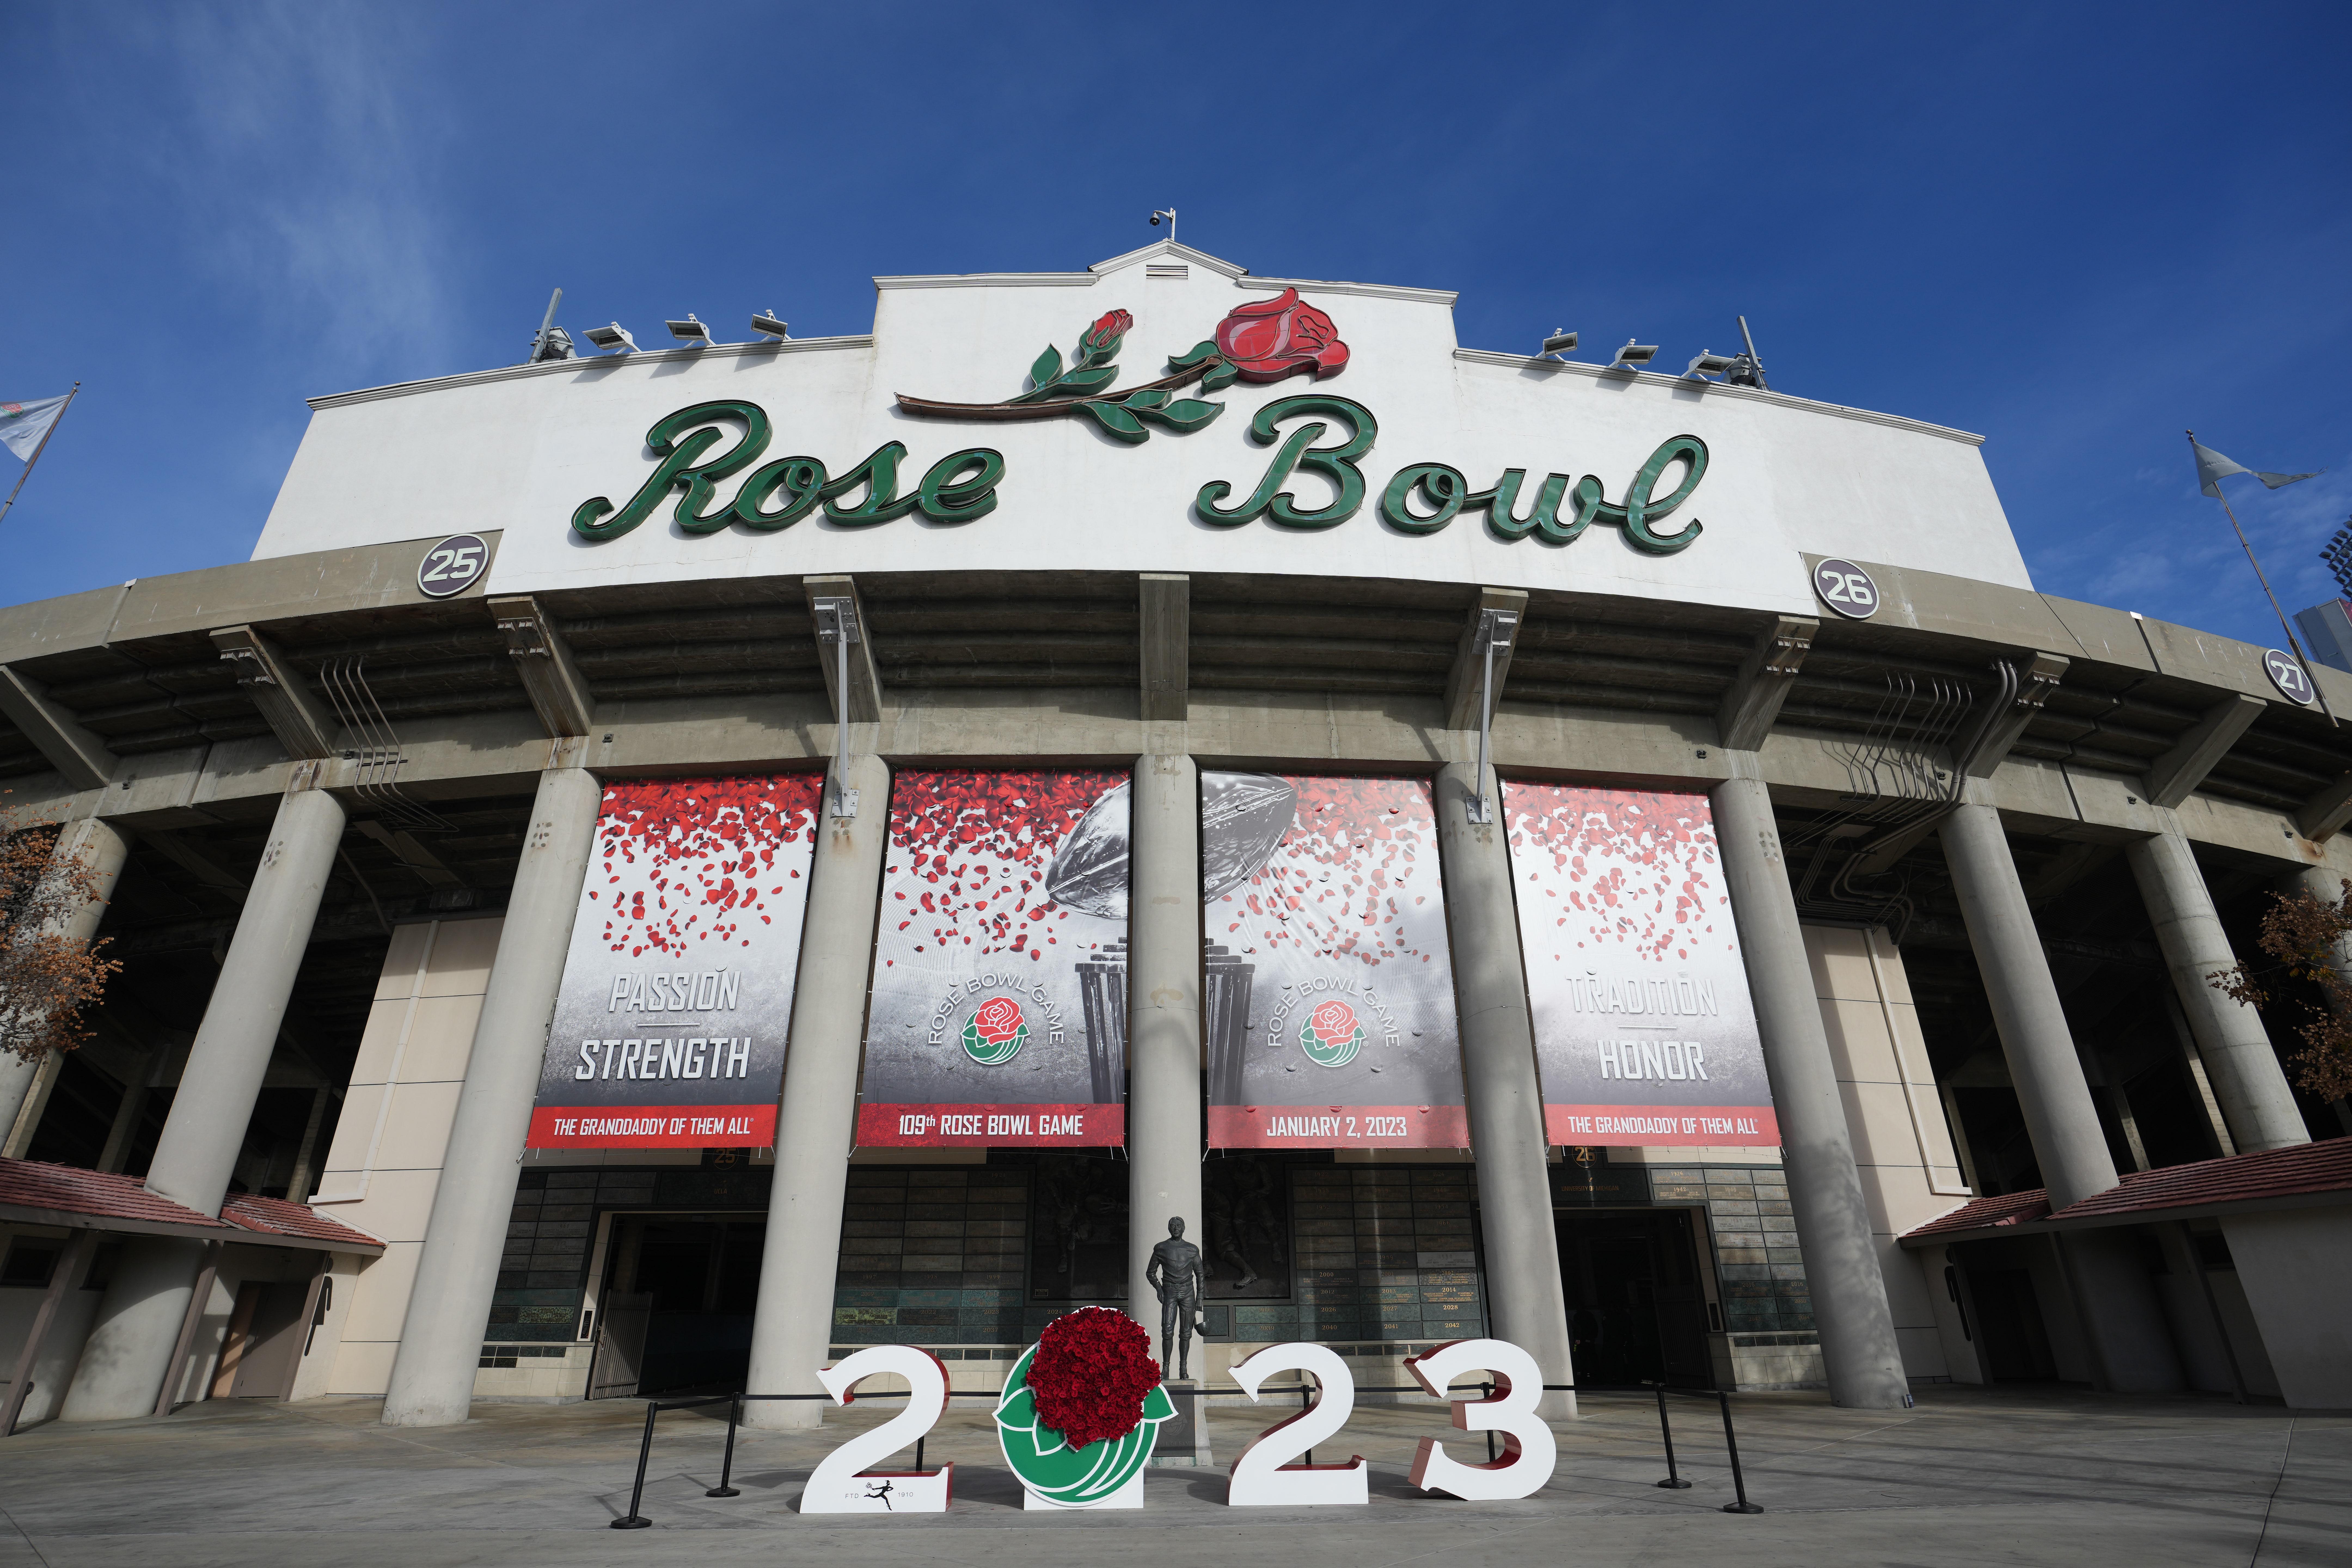 Jan 2, 2023; Pasadena, California, USA; A general overall view of the Rose Bowl Stadium facade before the game between the Penn State Nittany Lions and the Utah Utes at the 109th Rose Bowl game at the Rose Bowl. Mandatory Credit: Kirby Lee-USA TODAY Sports